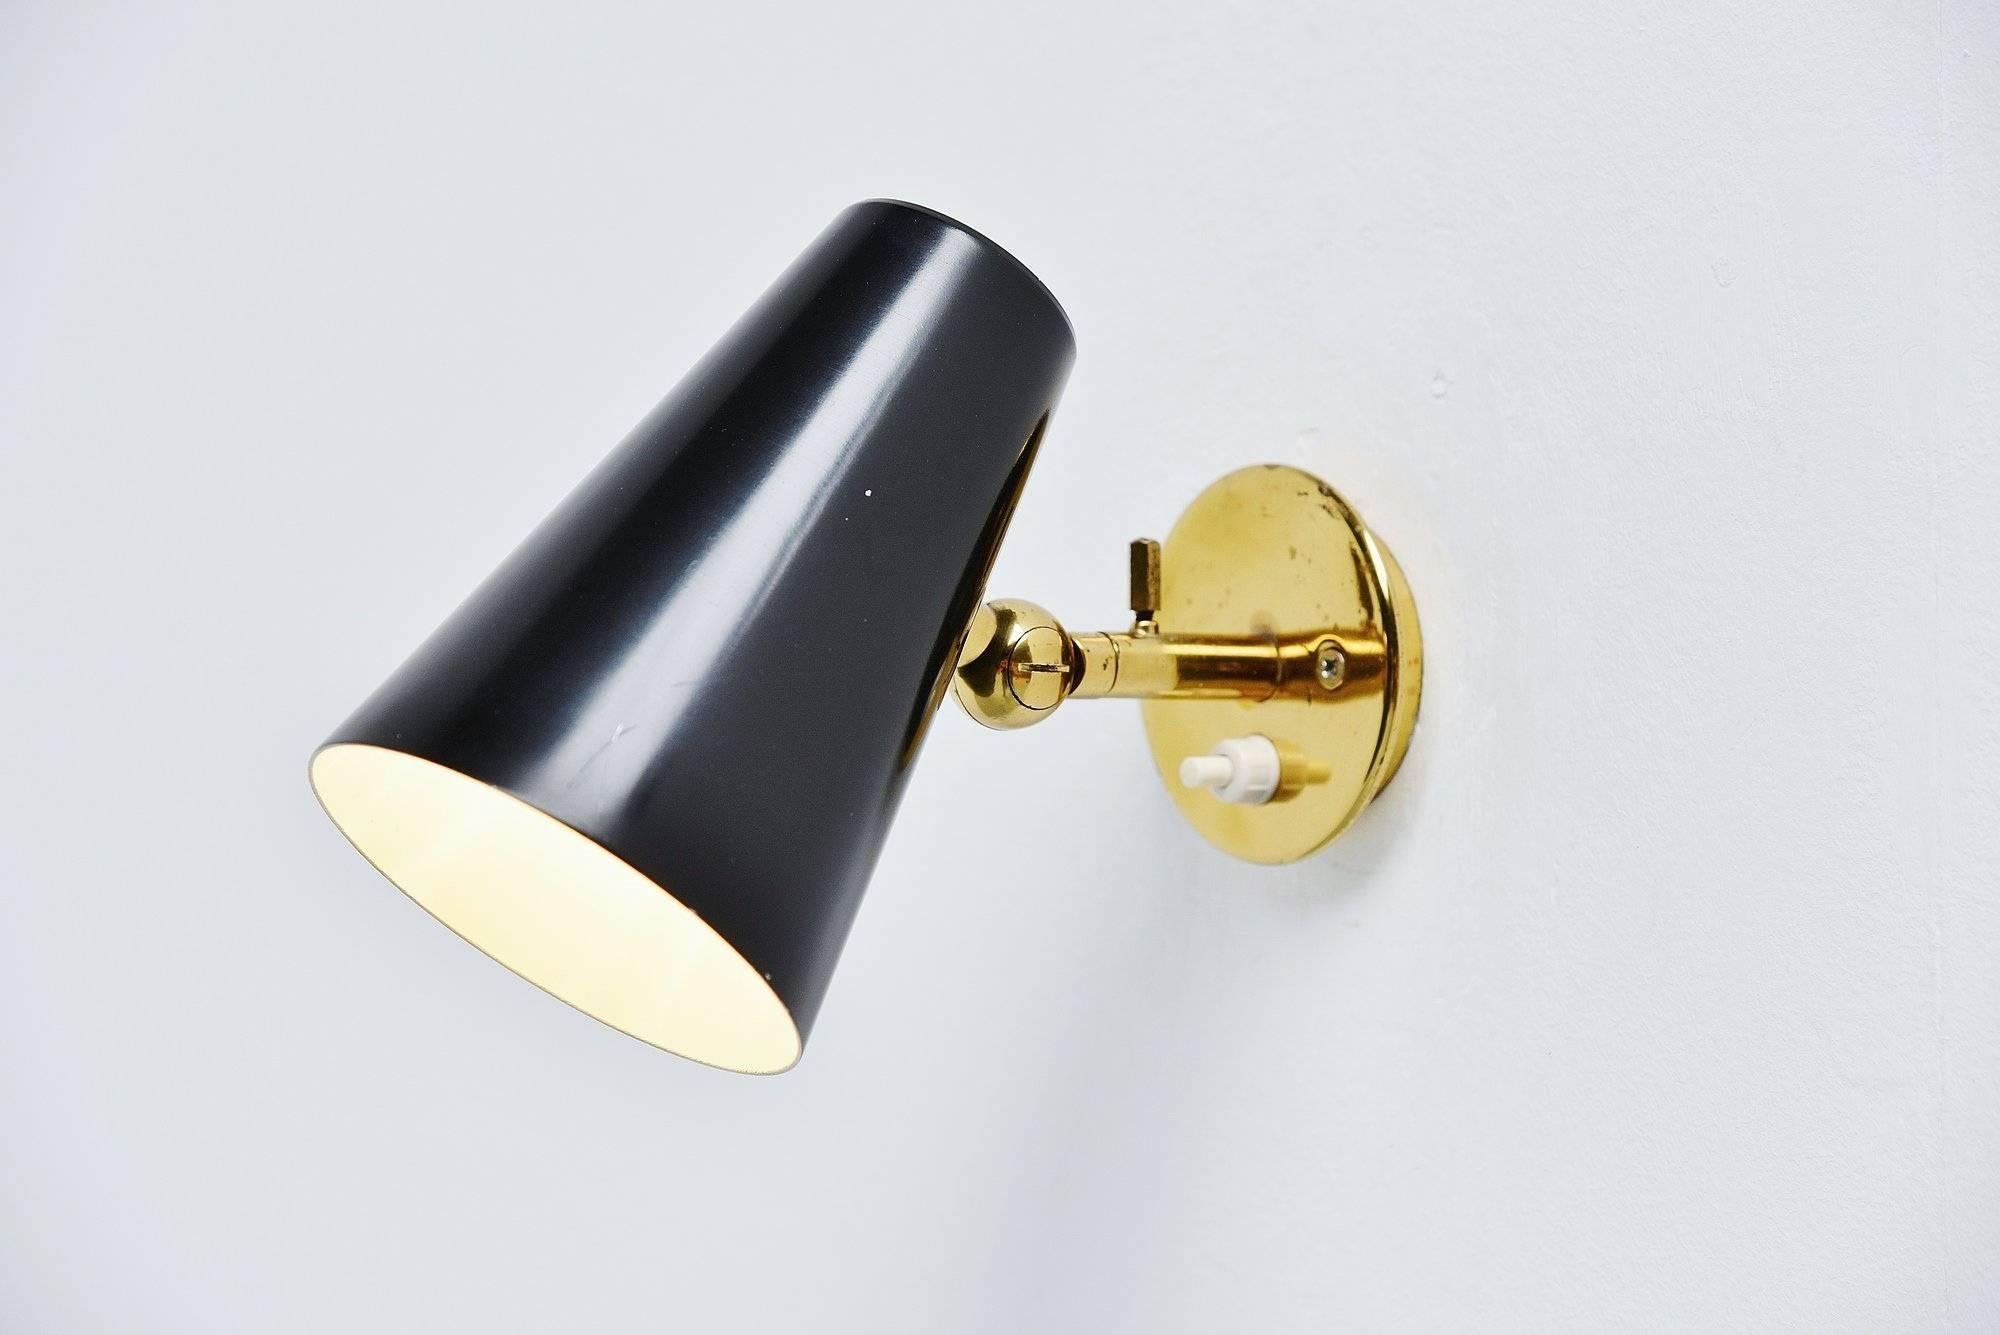 Nice pair of modernist sconces model 19 designed by Gino Sarfatti, manufactured by Arteluce, Italy 1951. The lamps have a black lacquered adjustable reflector in aluminium. Wall bracket and pivot in polished brass. The lamps are marked with the